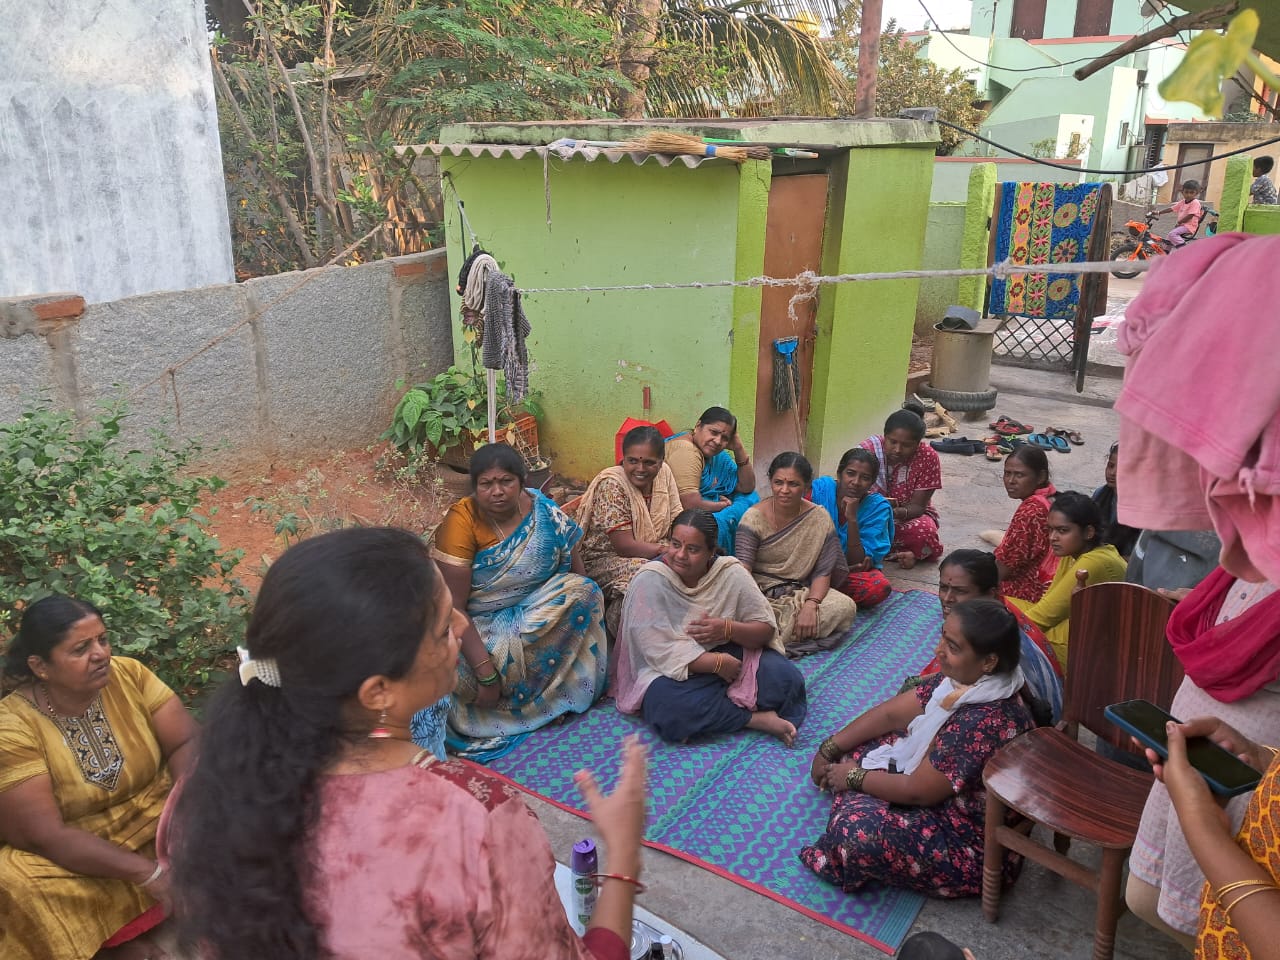 Women’s Day Celebration for Empowerment of Marginalized Communities in Bangalore